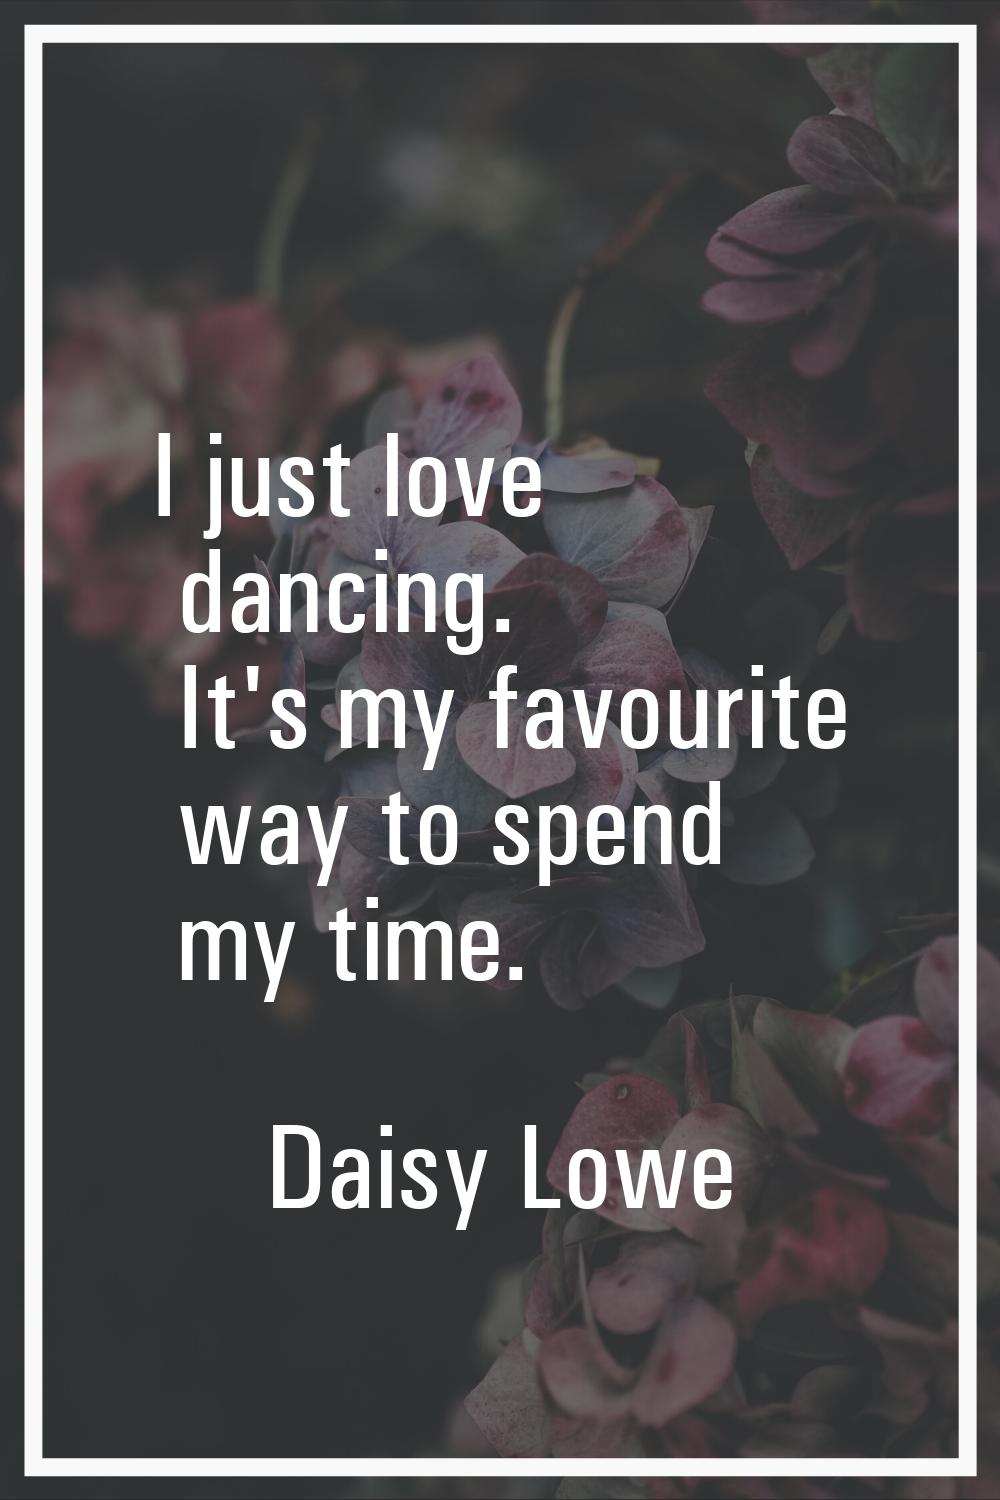 I just love dancing. It's my favourite way to spend my time.